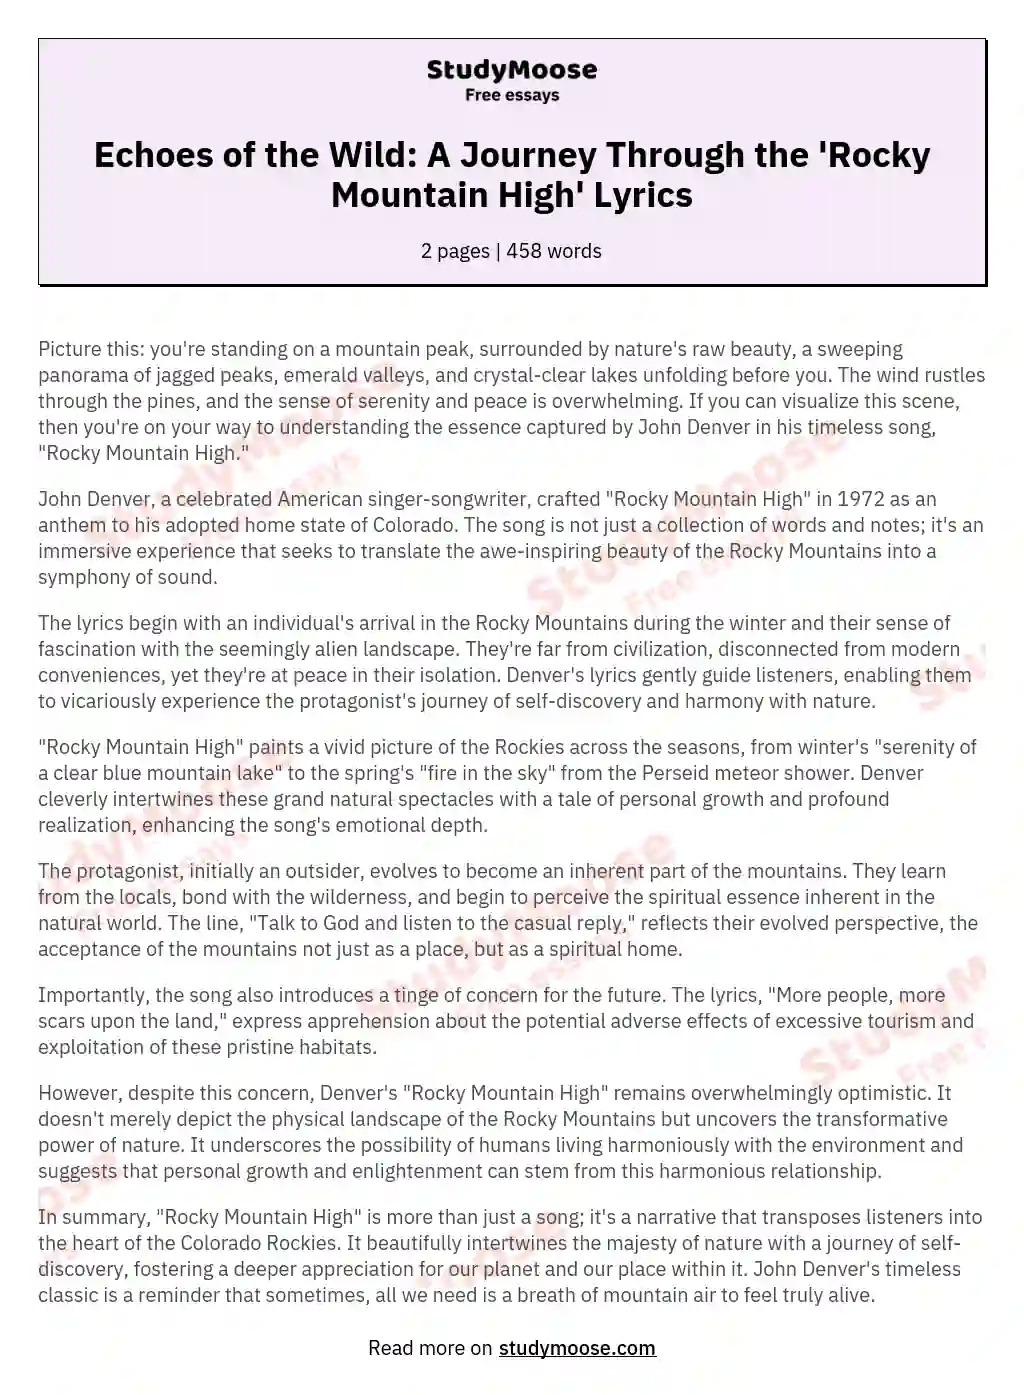 Echoes of the Wild: A Journey Through the 'Rocky Mountain High' Lyrics essay